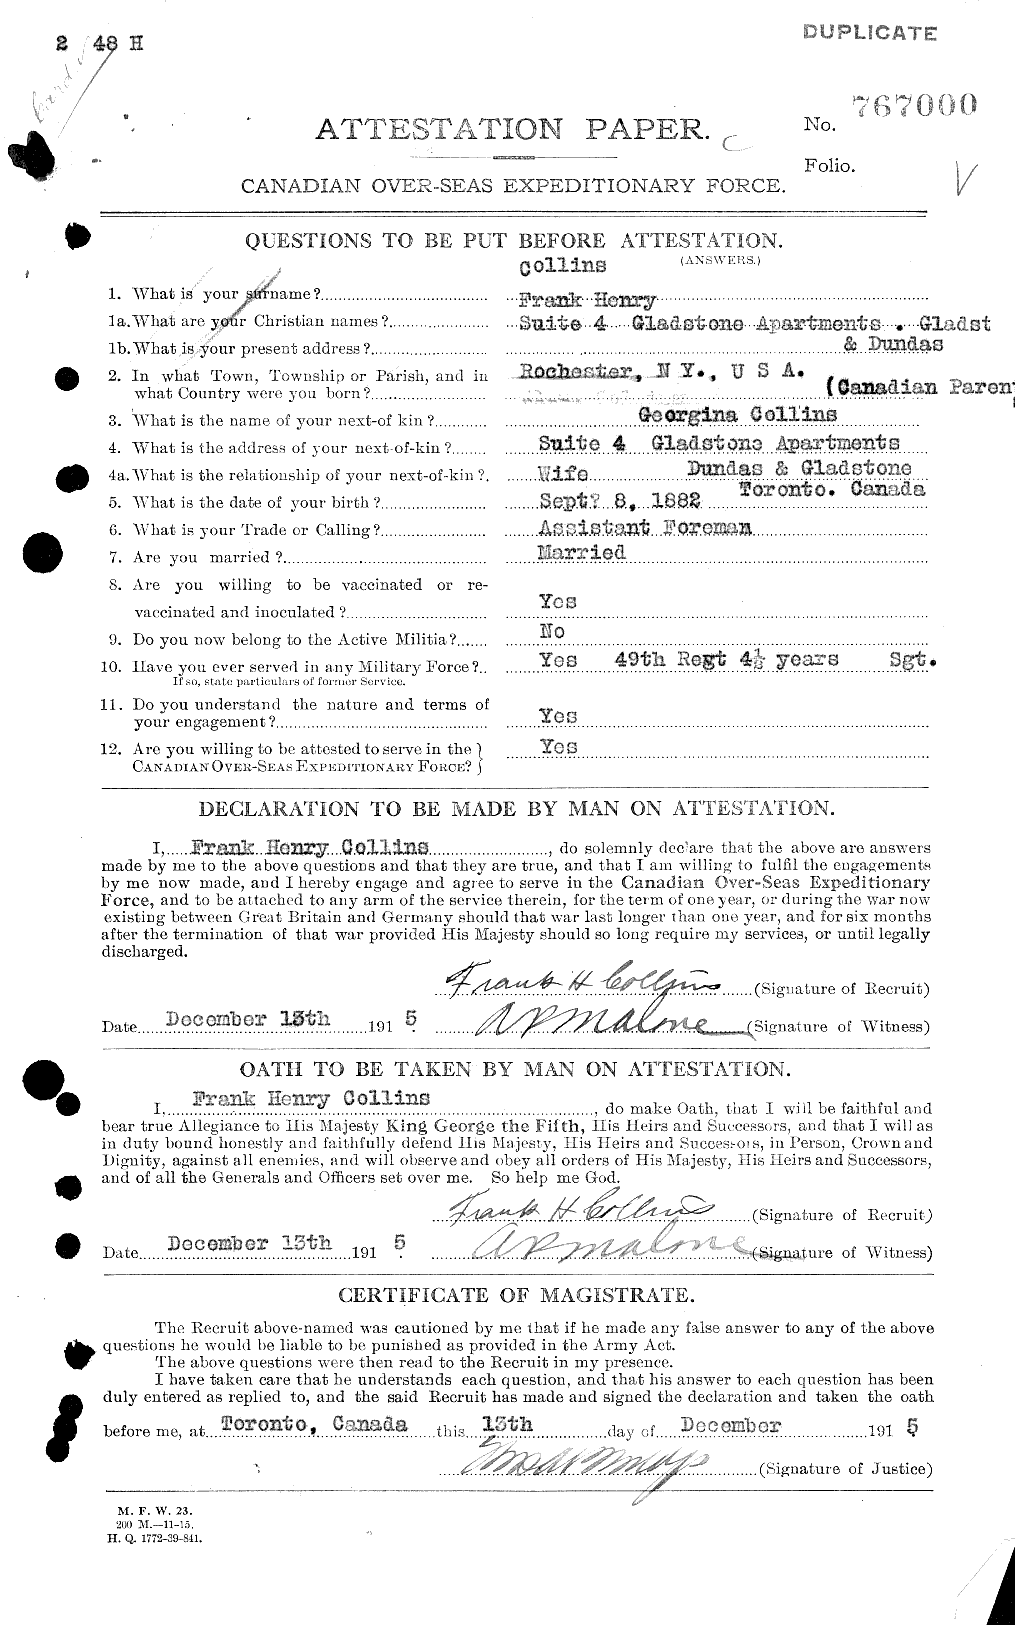 Personnel Records of the First World War - CEF 037812a